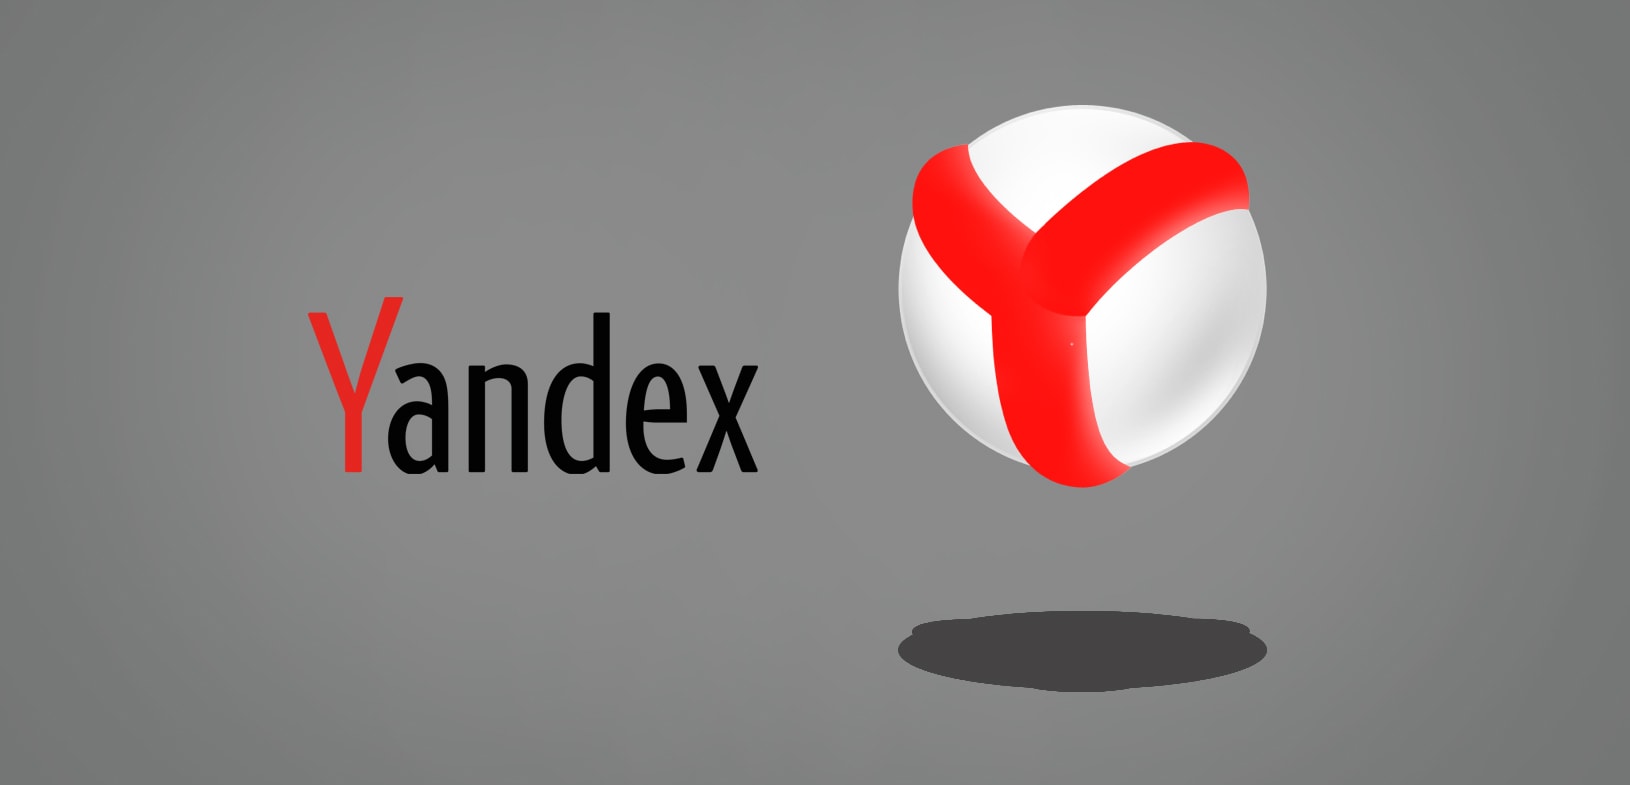 Top Search Engines is YANDEX Search